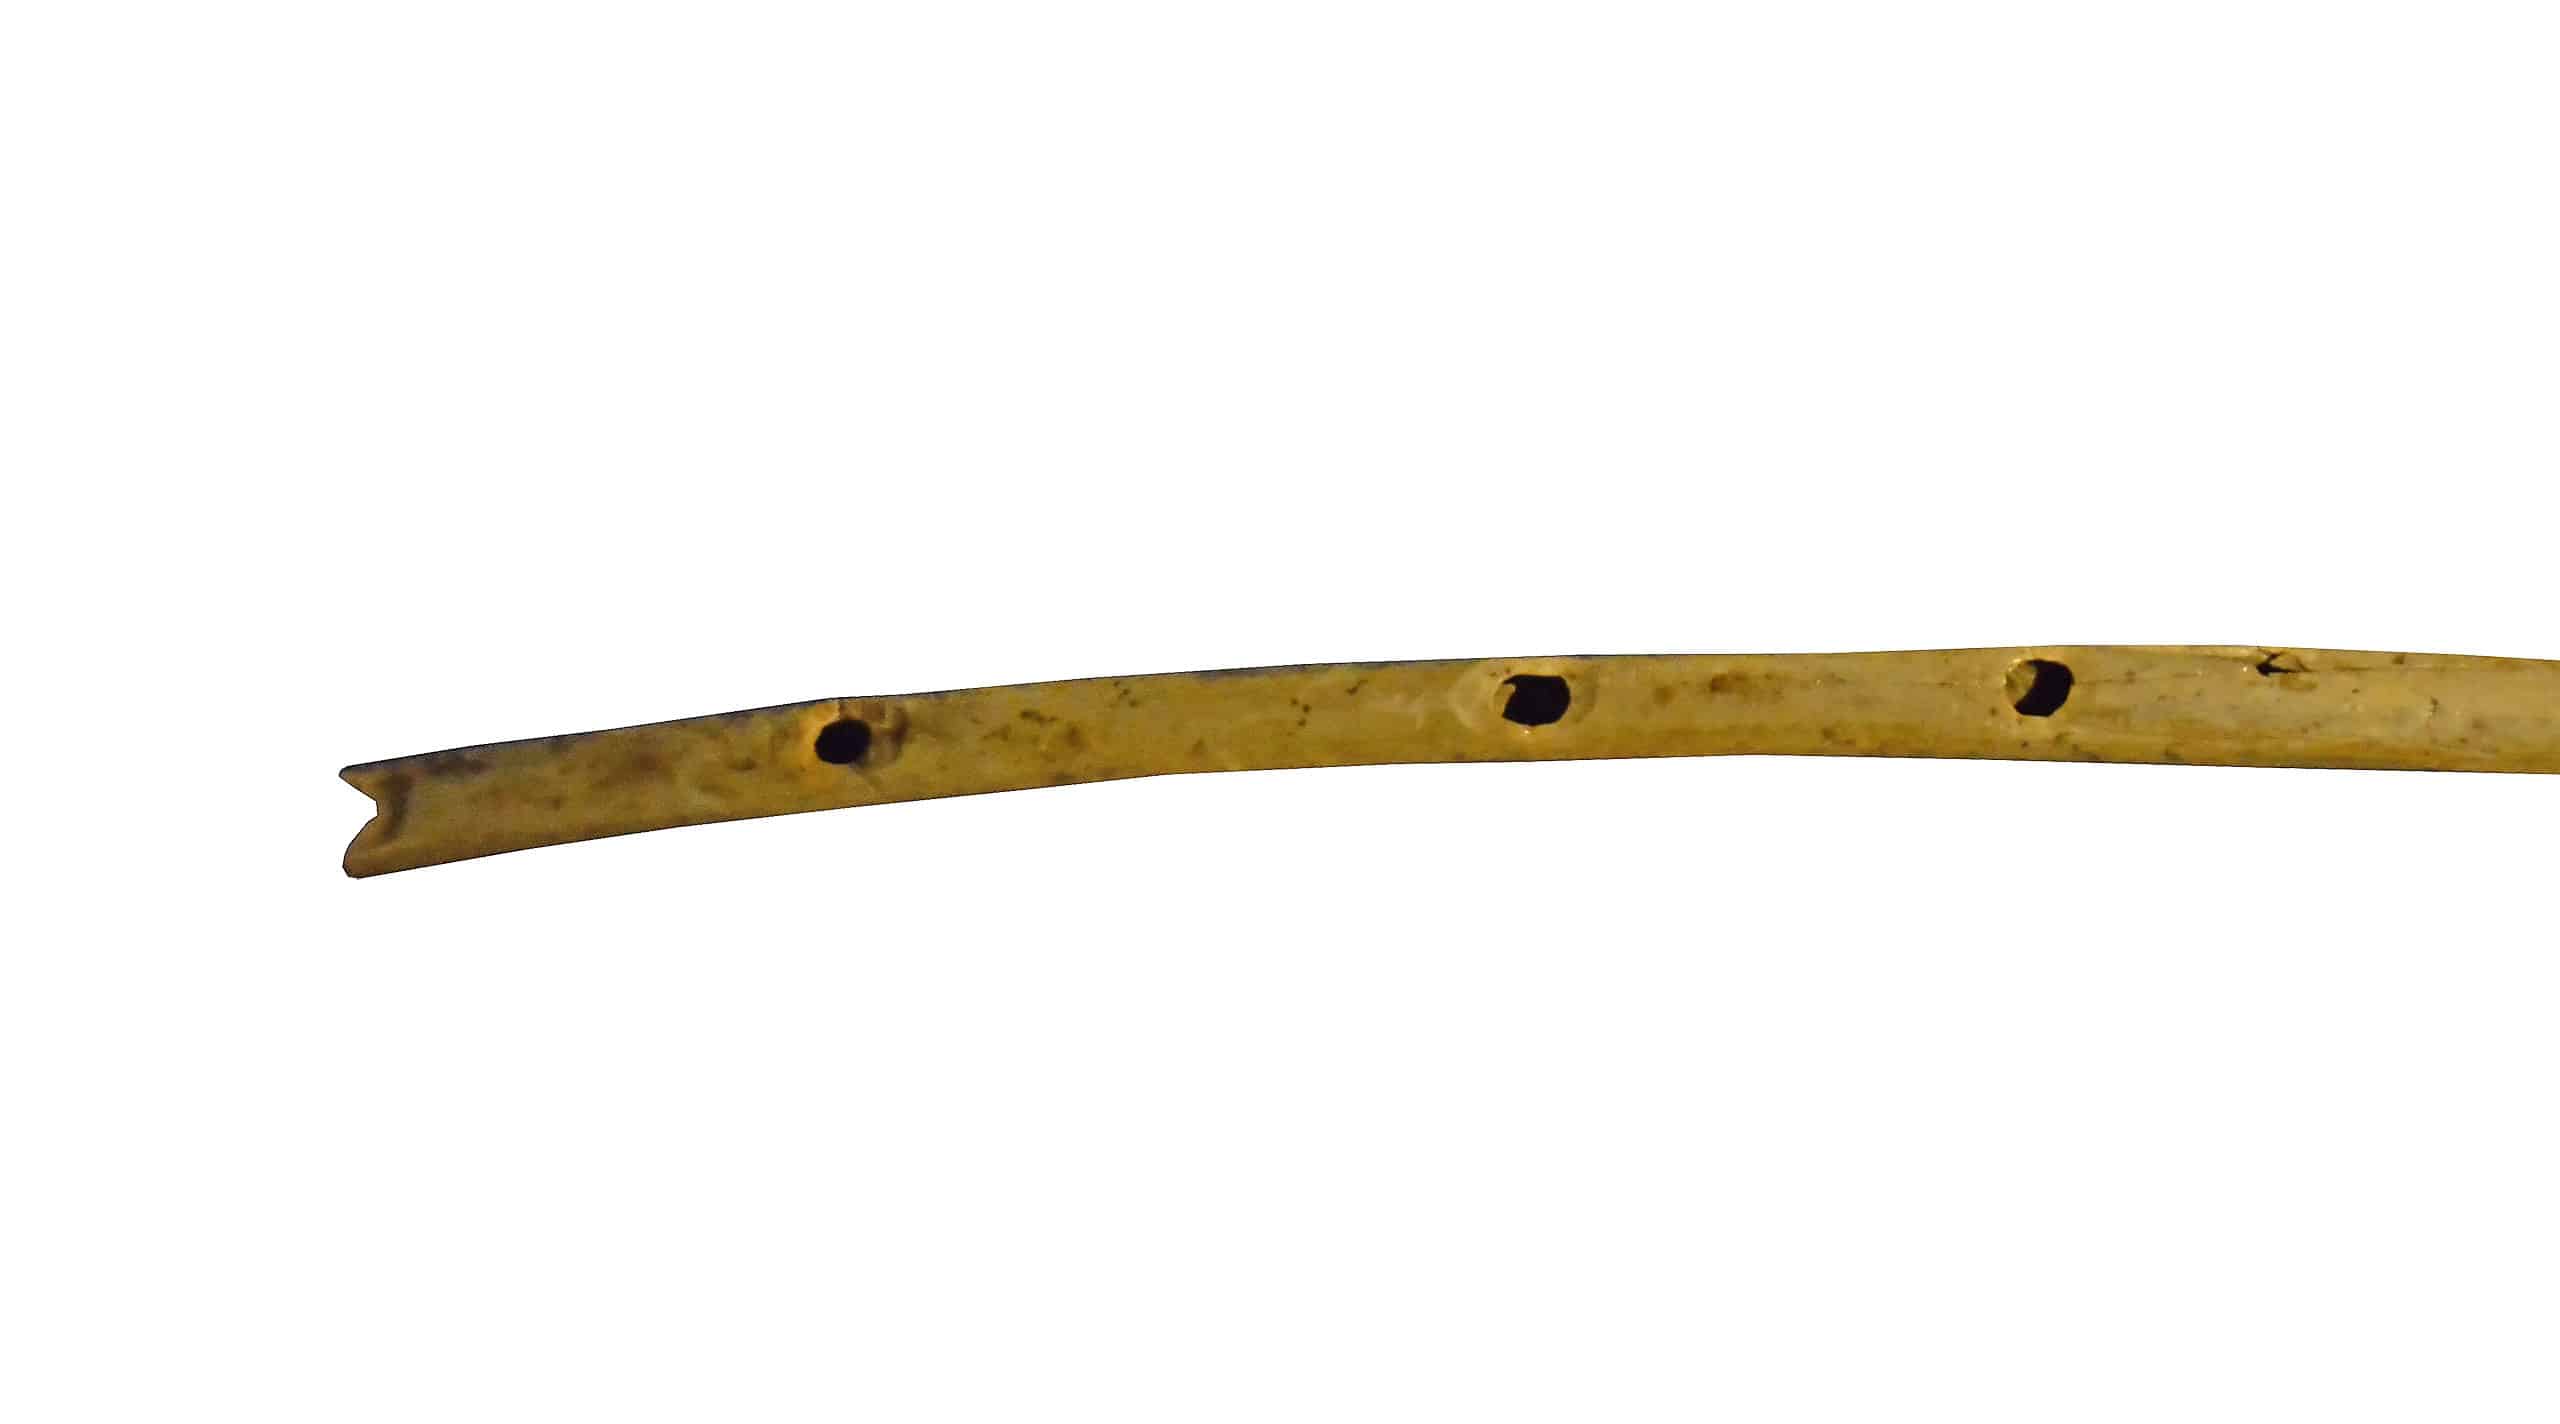 Flute made from a vulture's wing bone